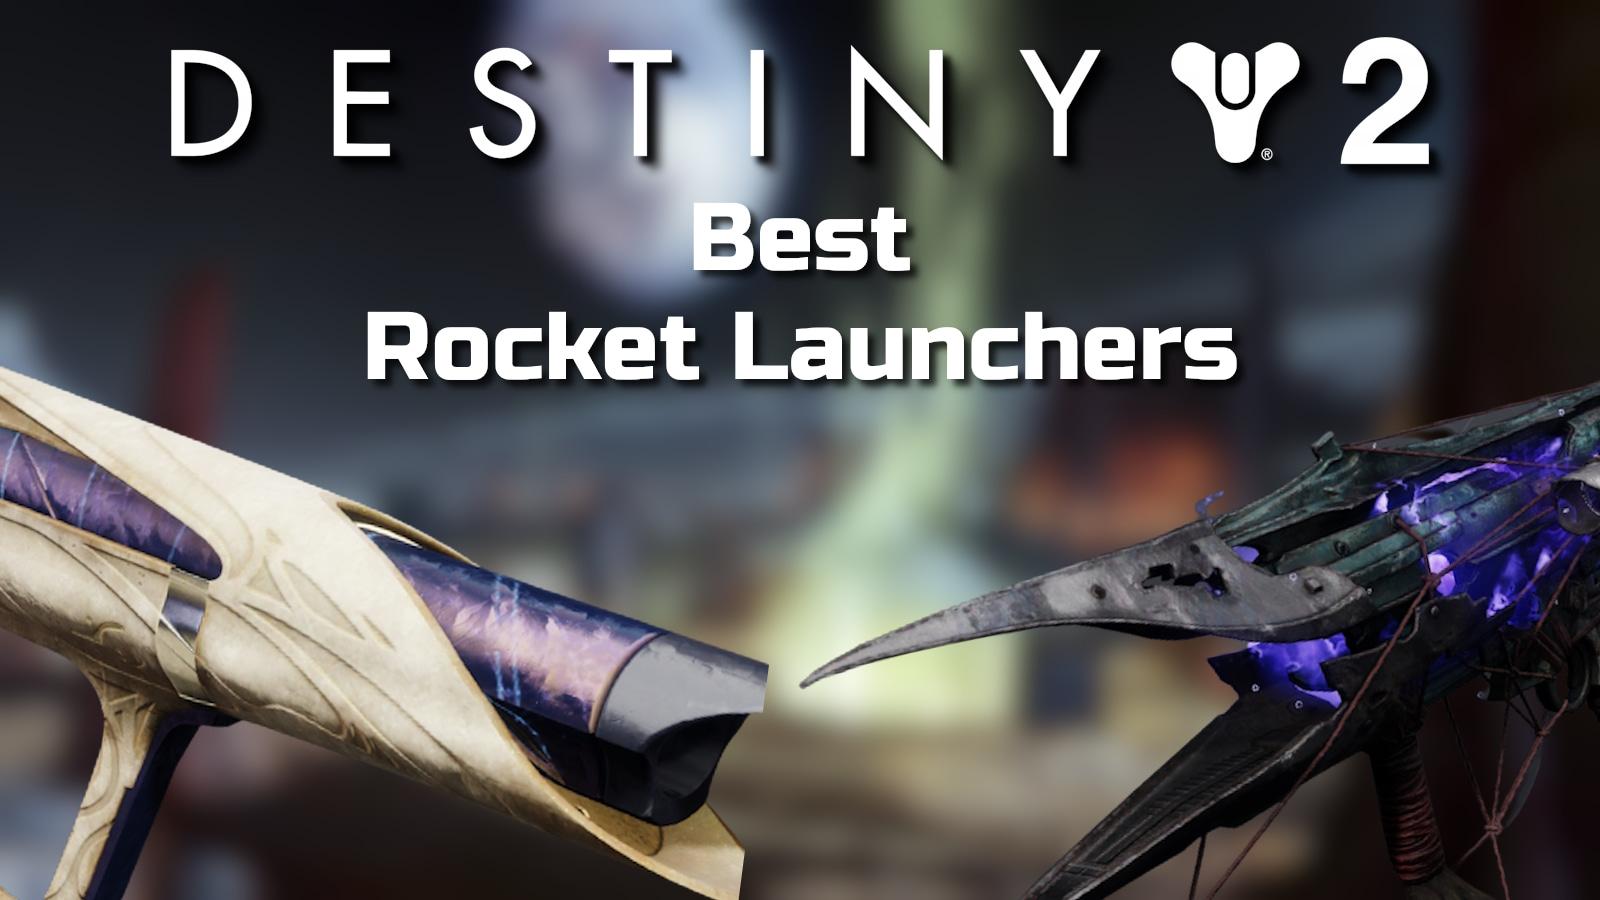 The Apex Predator and Deathbringer Rocket Launchers with Destiny 2 logo.